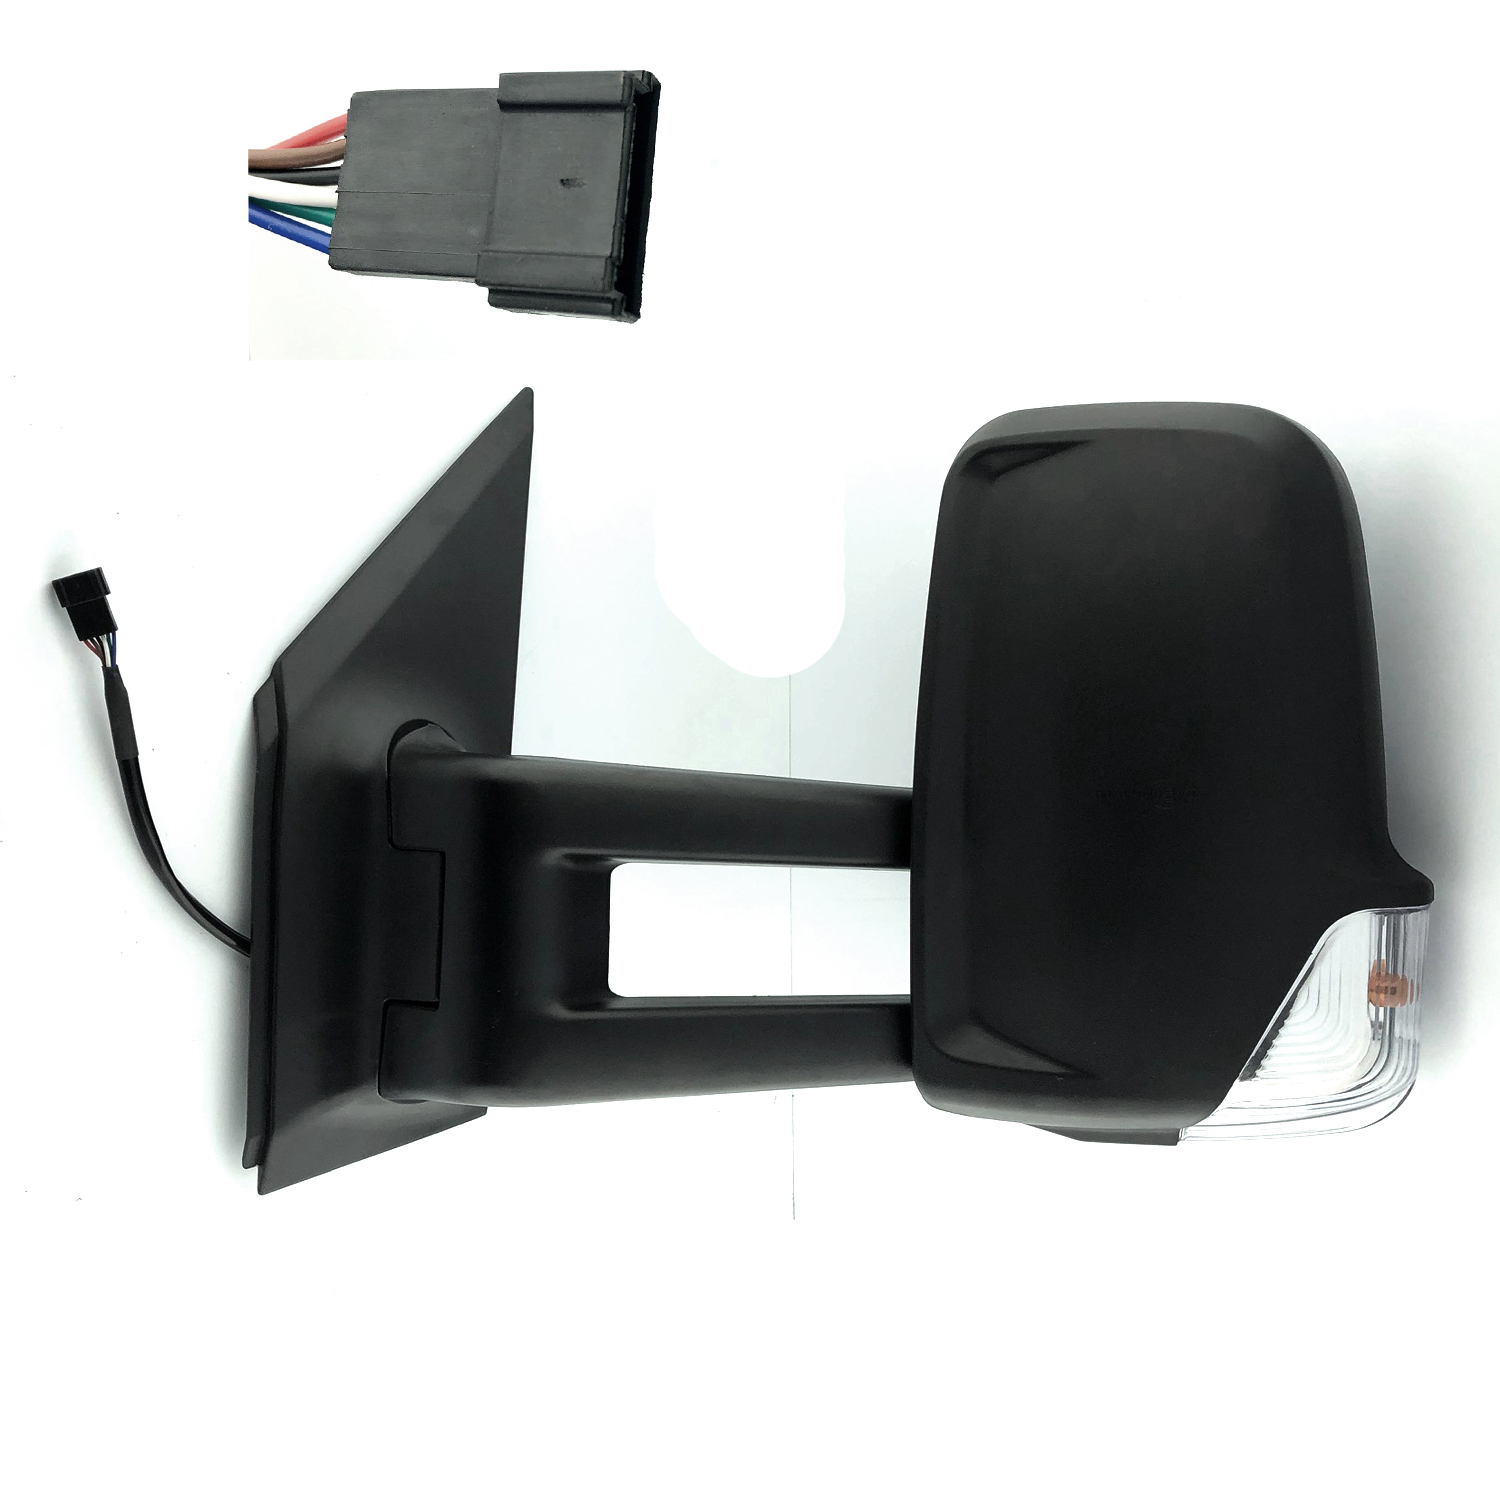 Mercedes Sprinter CHASSIS CAB Complete Wing Mirror Unit LEFT HAND ( UK Passenger Side ) 2006 to 2011 – Electric Wing Mirror Unit ( Long Arm )